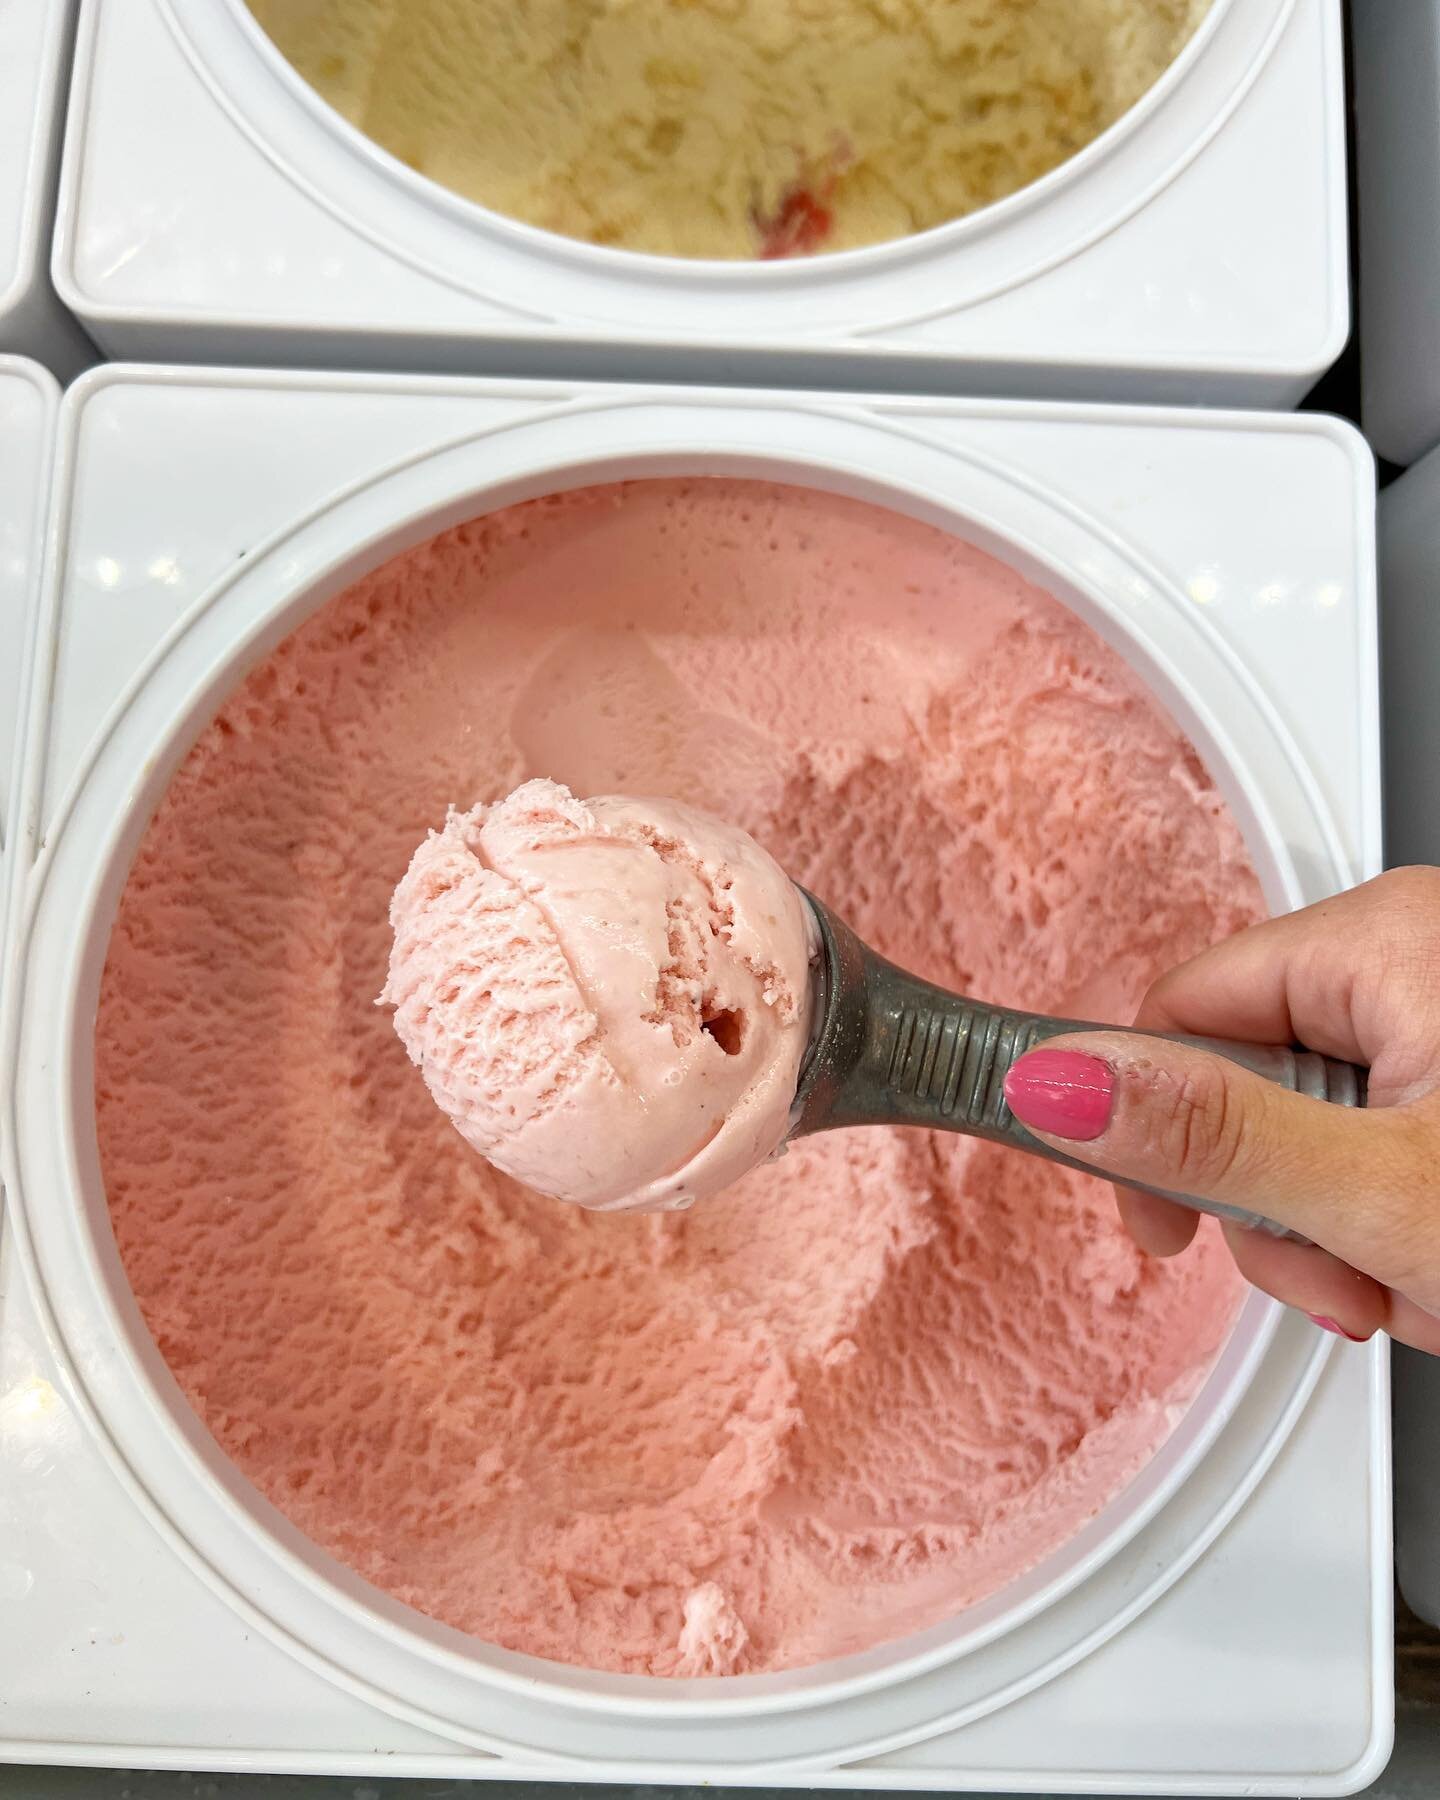 Happiness is STRAWBERRY ice cream on a spring day 🍓🤍 

Flavors:
Vanilla
Chocolate
Strawberry 
Mint Chip
Java Chunk
Moose Tracks
Strawberry Rhubarb Cobbler
Peachy Keen 

Come see us until 8PM tonight! We'd love to see you!